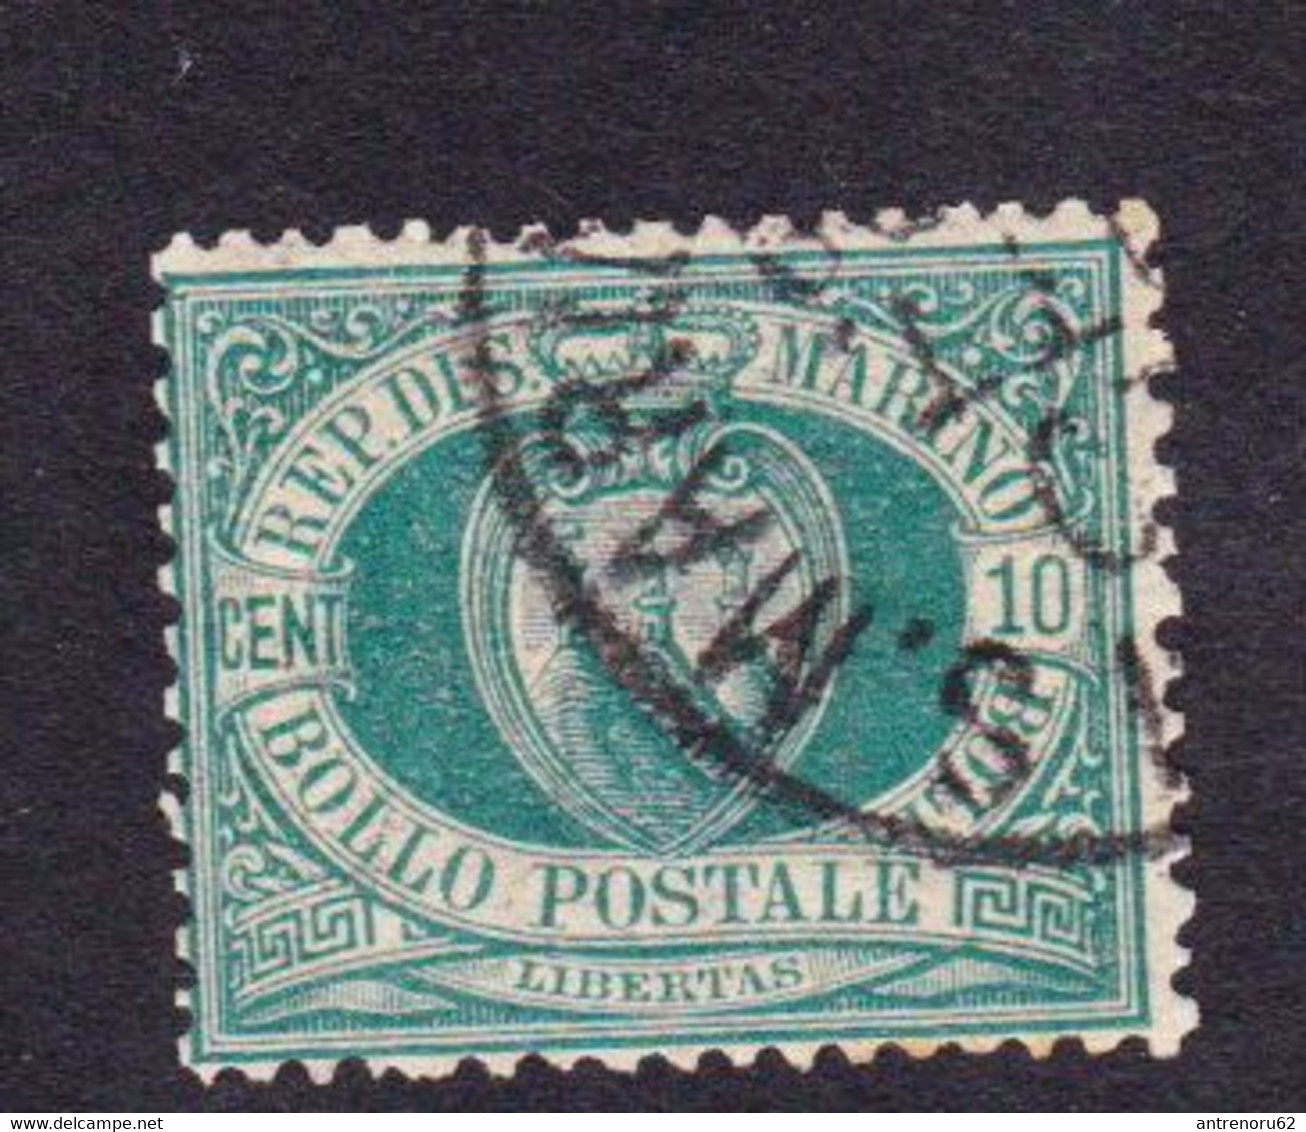 STAMPS-SAN-MARINO-1892-USED-SEE-SCAN - Gebraucht